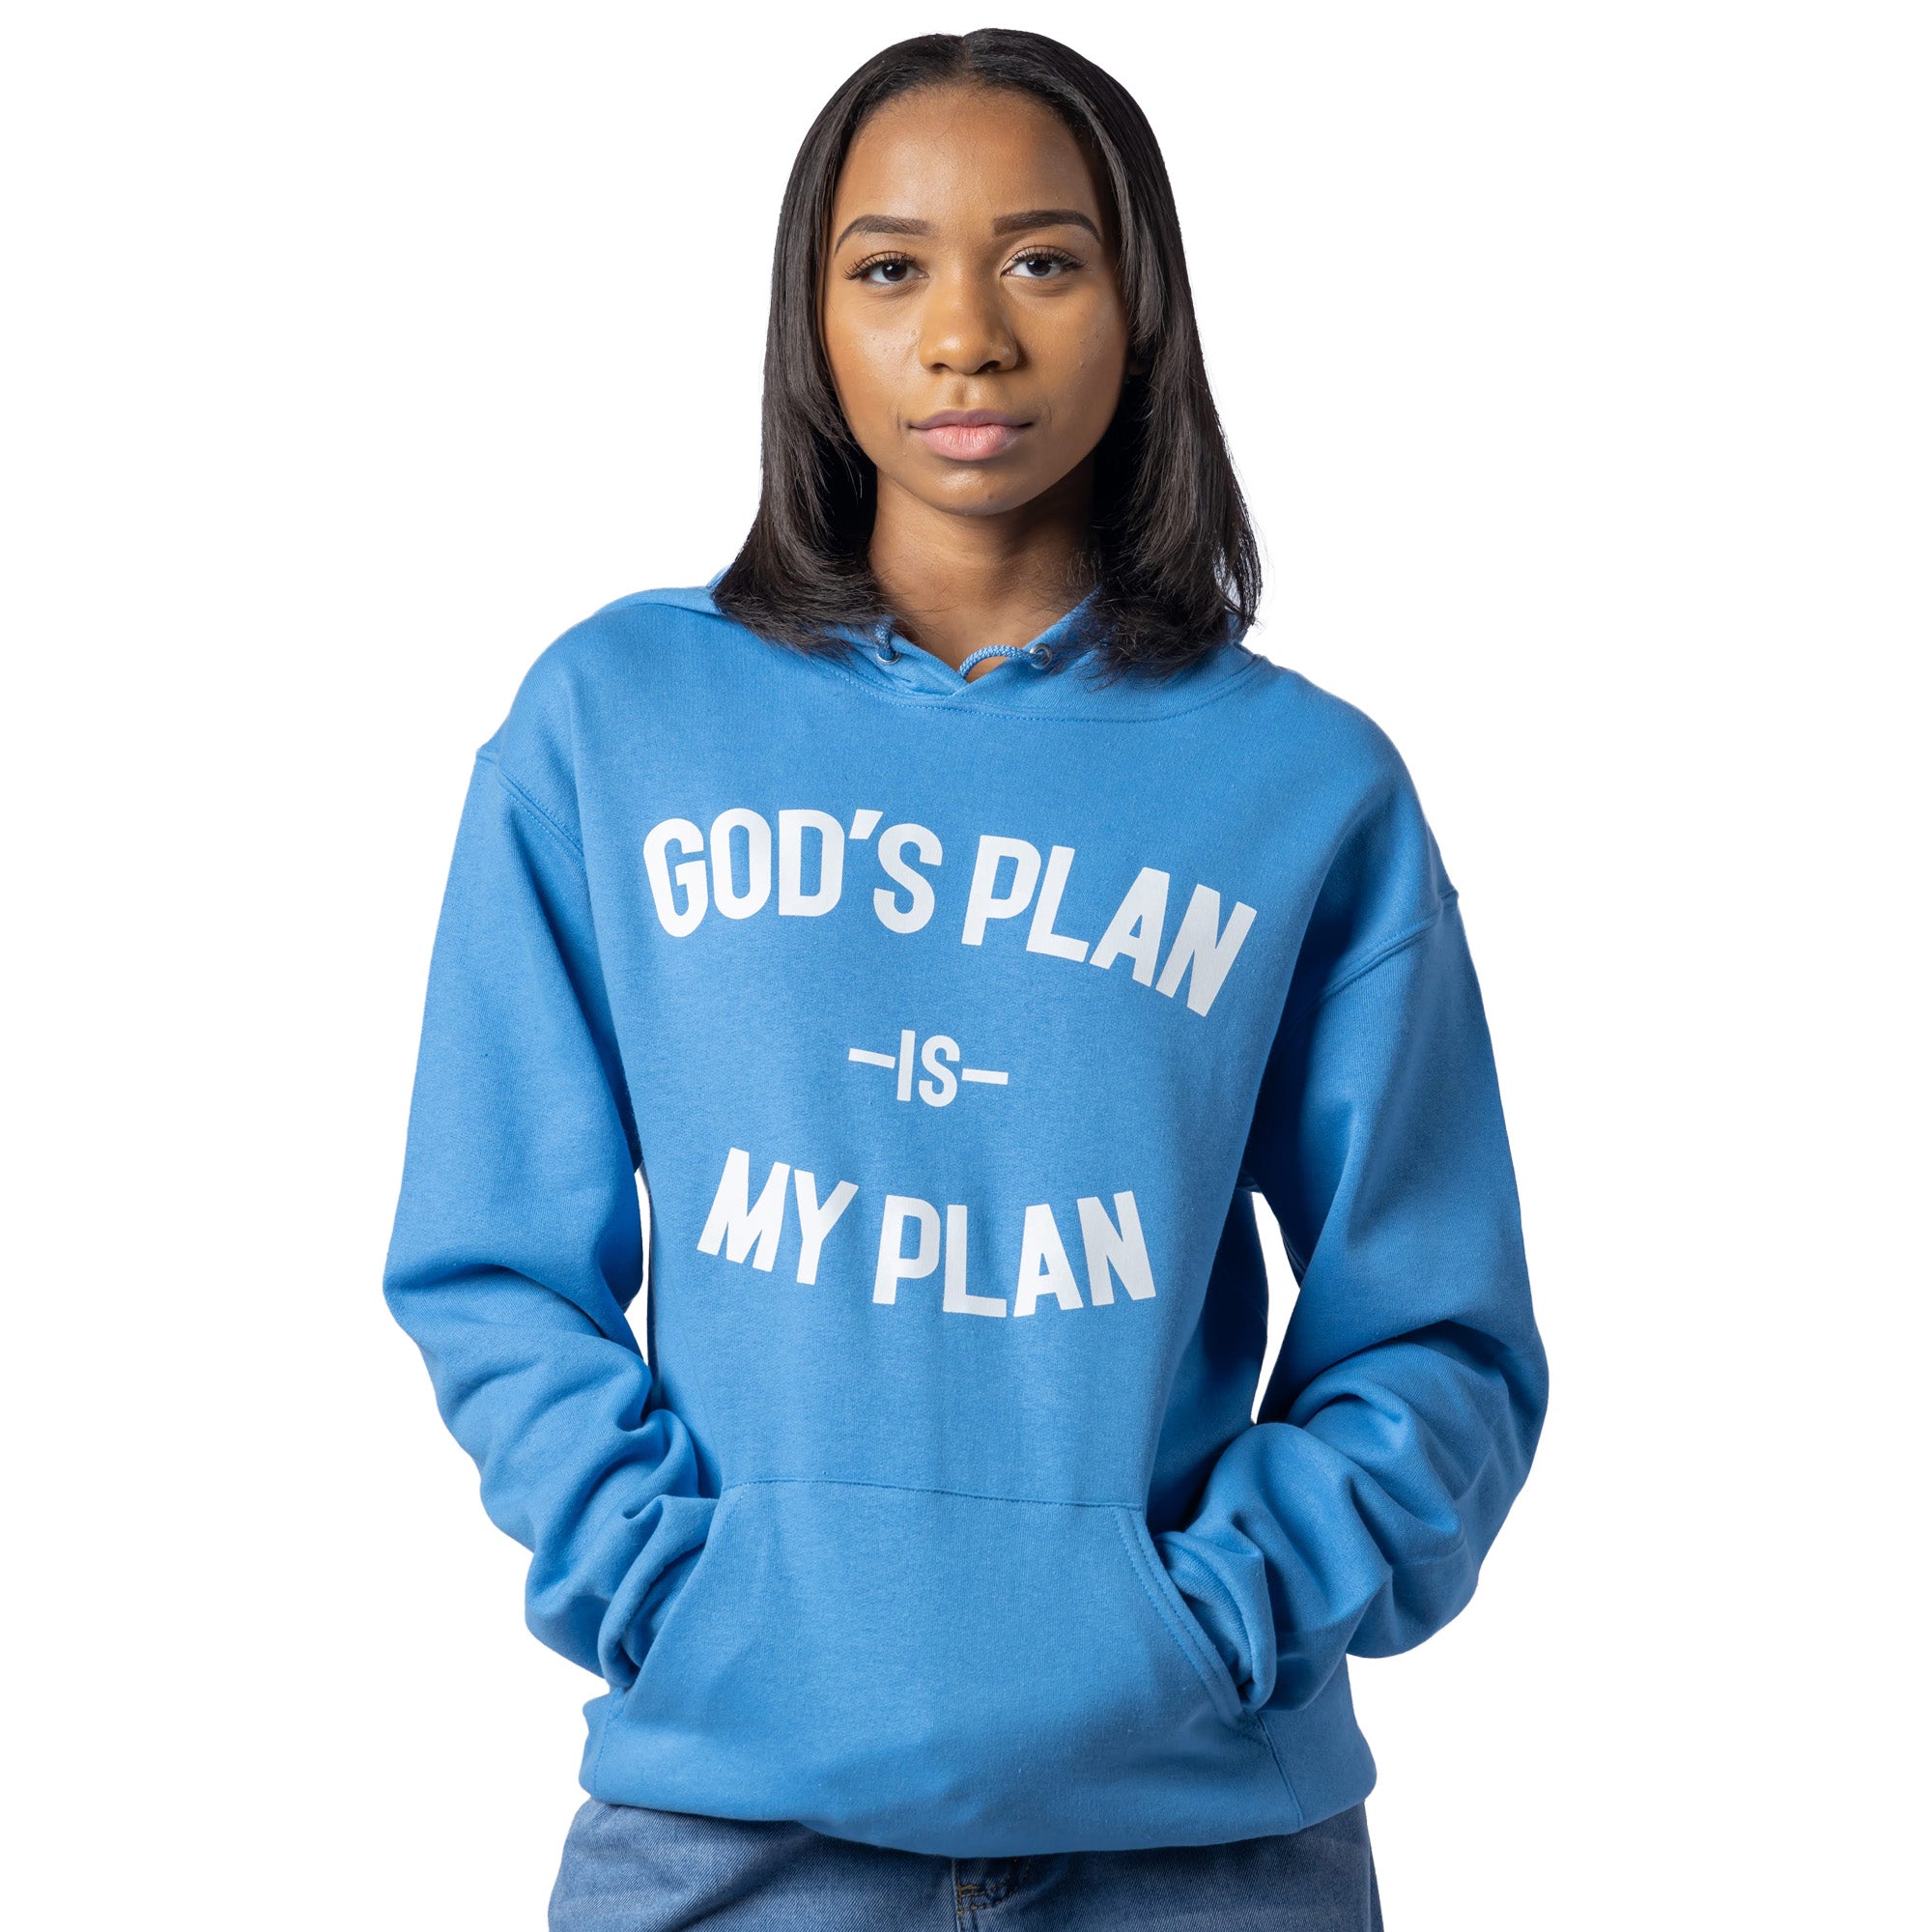 God's Plan My Plan , Used By God, Used By God Clothing, Christian Apparel, Christian Hoodies, Christian Clothing, Christian Shirts, God Shirts, Christian Sweatshirts, God Clothing, Jesus Hoodie, christian clothing t shirts, Jesus Clothes, t-shirts about jesus, hoodies near me, Christian Tshirts, God Is Dope, Art Of Homage, Red Letter Clothing, Elevated Faith, Active Faith Sports, Beacon Threads, God The Father Apparel